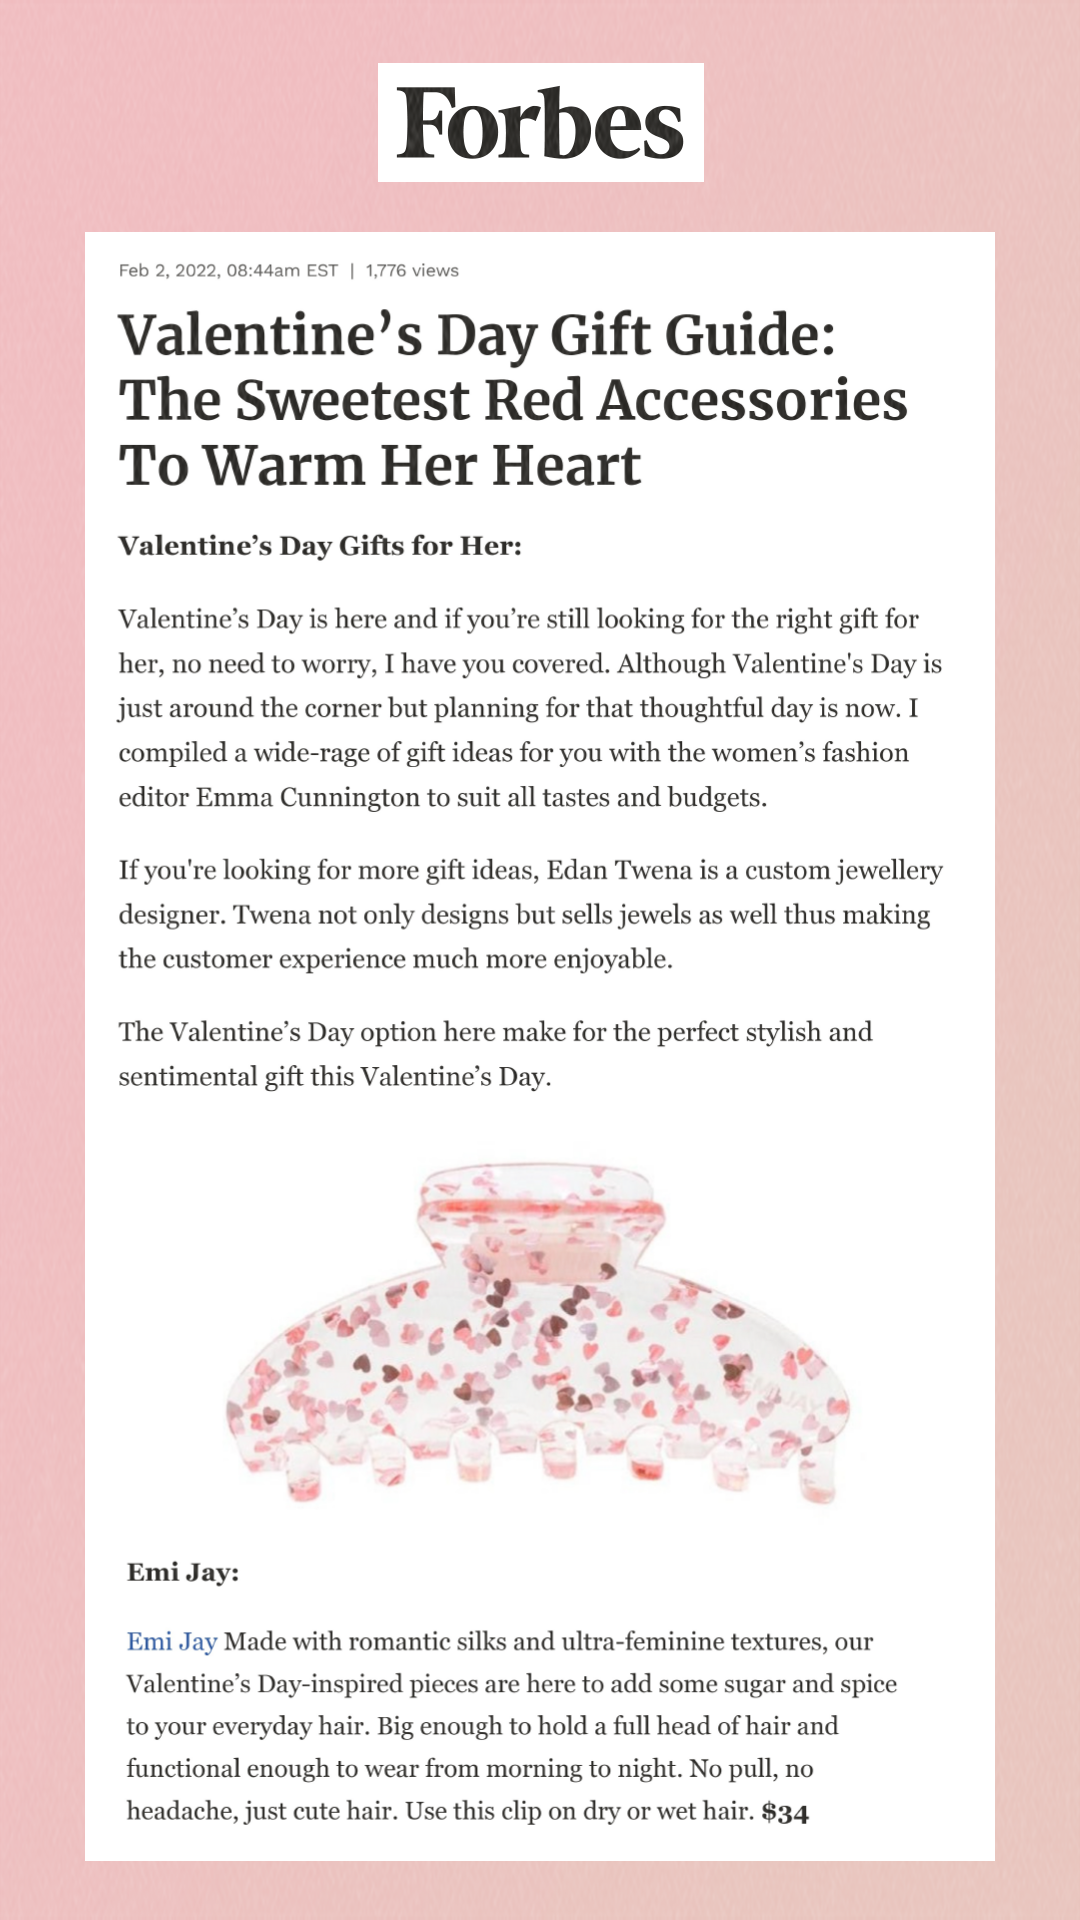 Forbes. Valentine’s Day Gift Guide: The Sweetest Red Accessories To Warm Her Heart. Valentine’s Day Gifts for Her: Valentine’s Day is here and if you’re still looking for the right gift for her, no need to worry, I have you covered. Although Valentine's Day is just around the corner but planning for that thoughtful day is now. I compiled a wide-rage of gift ideas for you with the women’s fashion editor Emma Cunnington to suit all tastes and budgets. If you're looking for more gift ideas, Edan Twena is a custom jewellery designer. Twena not only designs but sells jewels as well thus making the customer experience much more enjoyable. The Valentine’s Day option here make for the perfect stylish and sentimental gift this Valentine’s Day. Emi Jay: Emi Jay Made with romantic silks and ultra-feminine textures, our Valentine’s Day-inspired pieces are here to add some sugar and spice to your everyday hair. Big enough to hold a full head of hair and functional enough to wear from morning to night. No pull, no headache, just cute hair. Use this clip on dry or wet hair. $34